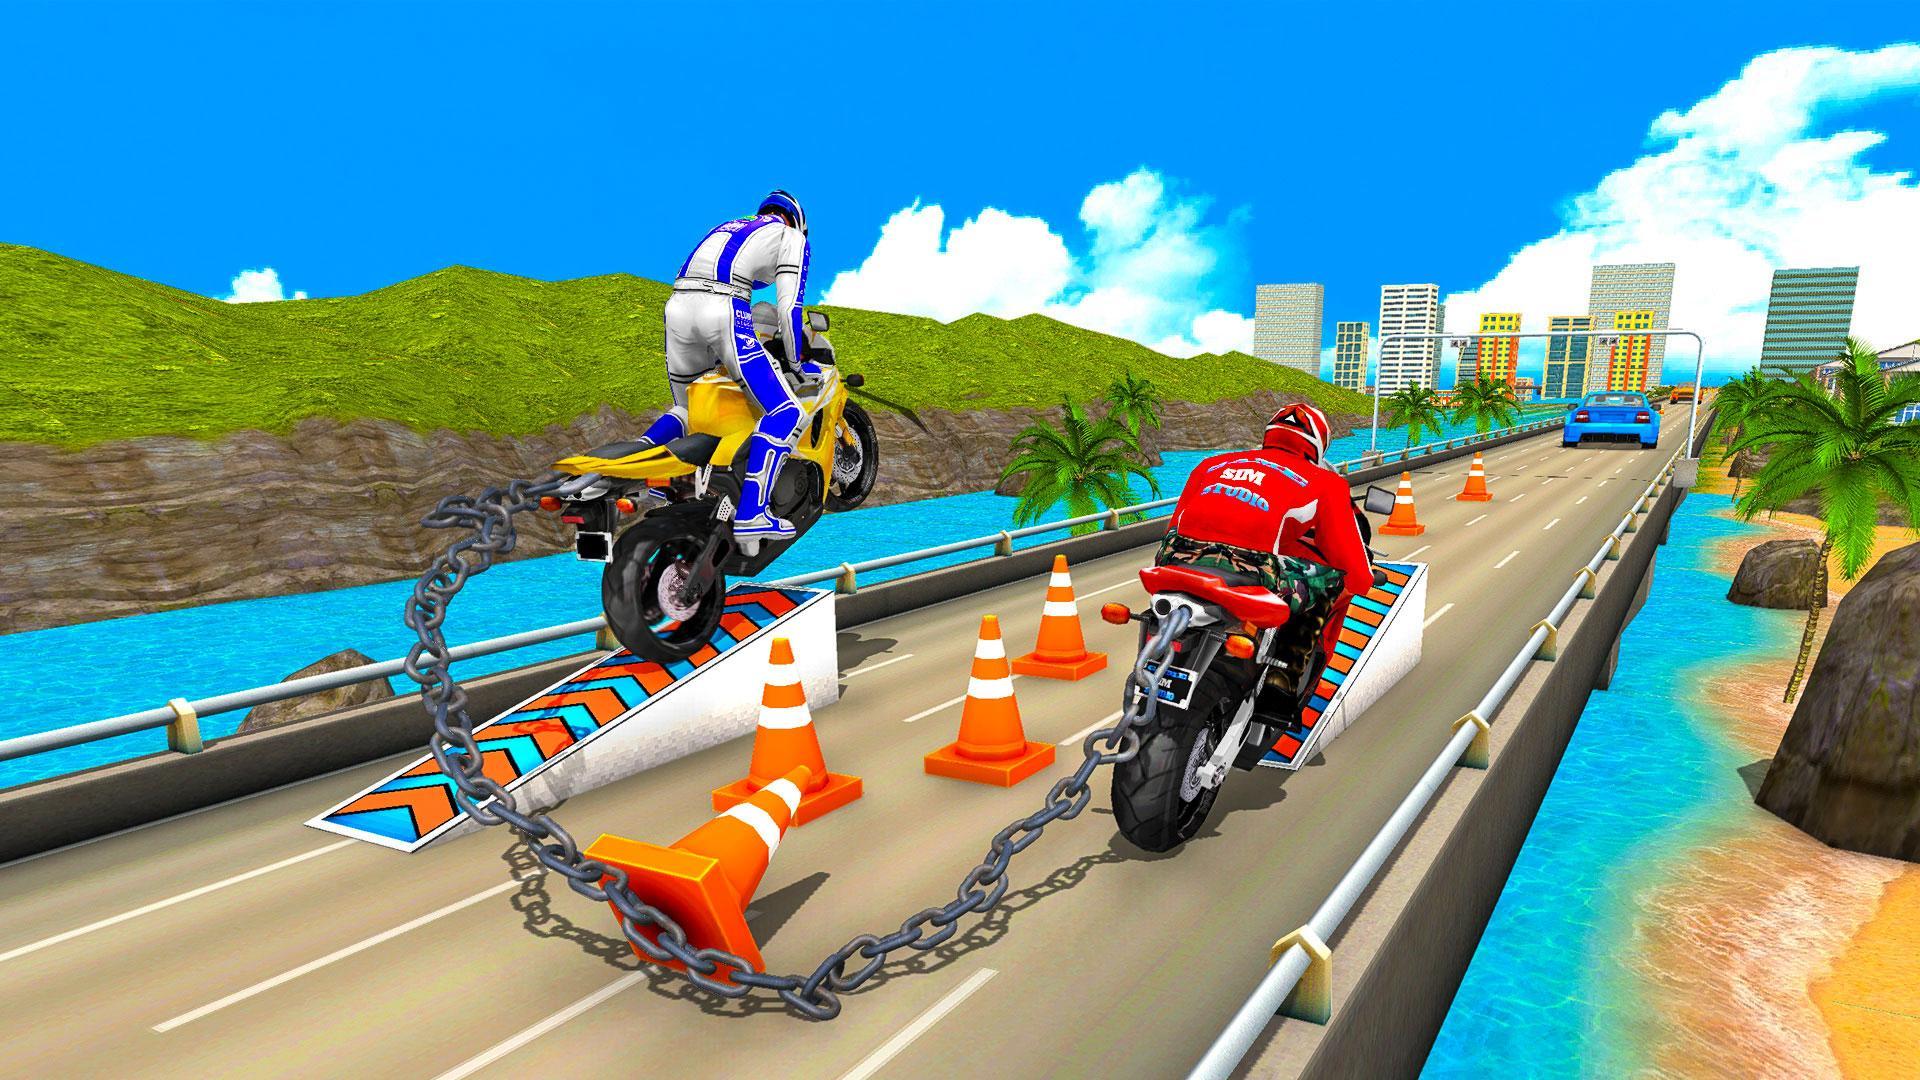 Chained Moto Bike Racing 3D 2019 for Android - APK Download